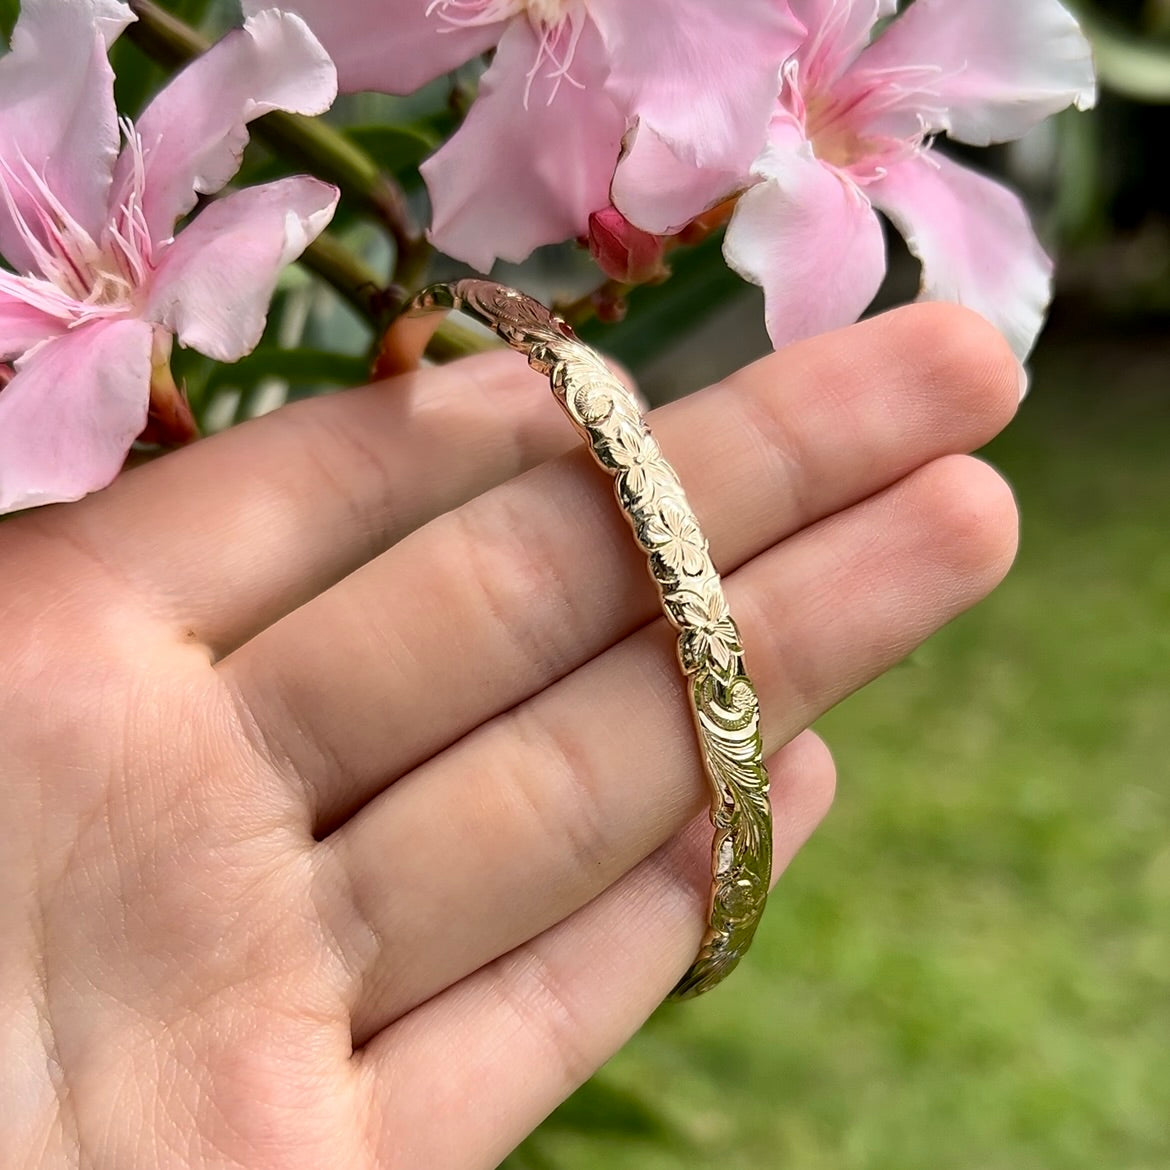 Scalloped Old English w/ Hibiscus 6mm Hawaiian Bangle in 14K Pink Gold